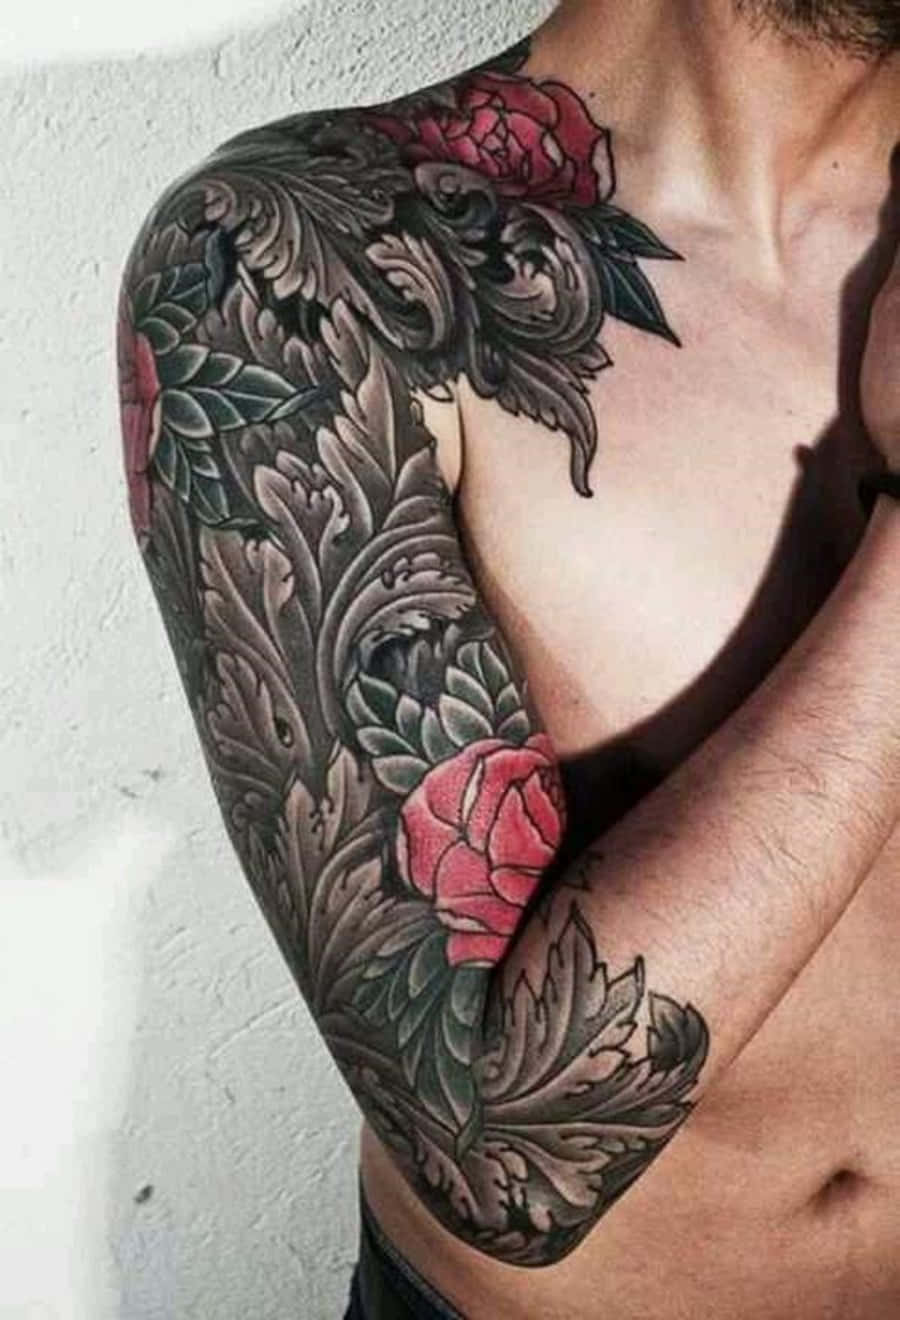 Artistic Expression Unleashed: Tattoo Arm Masterpiece